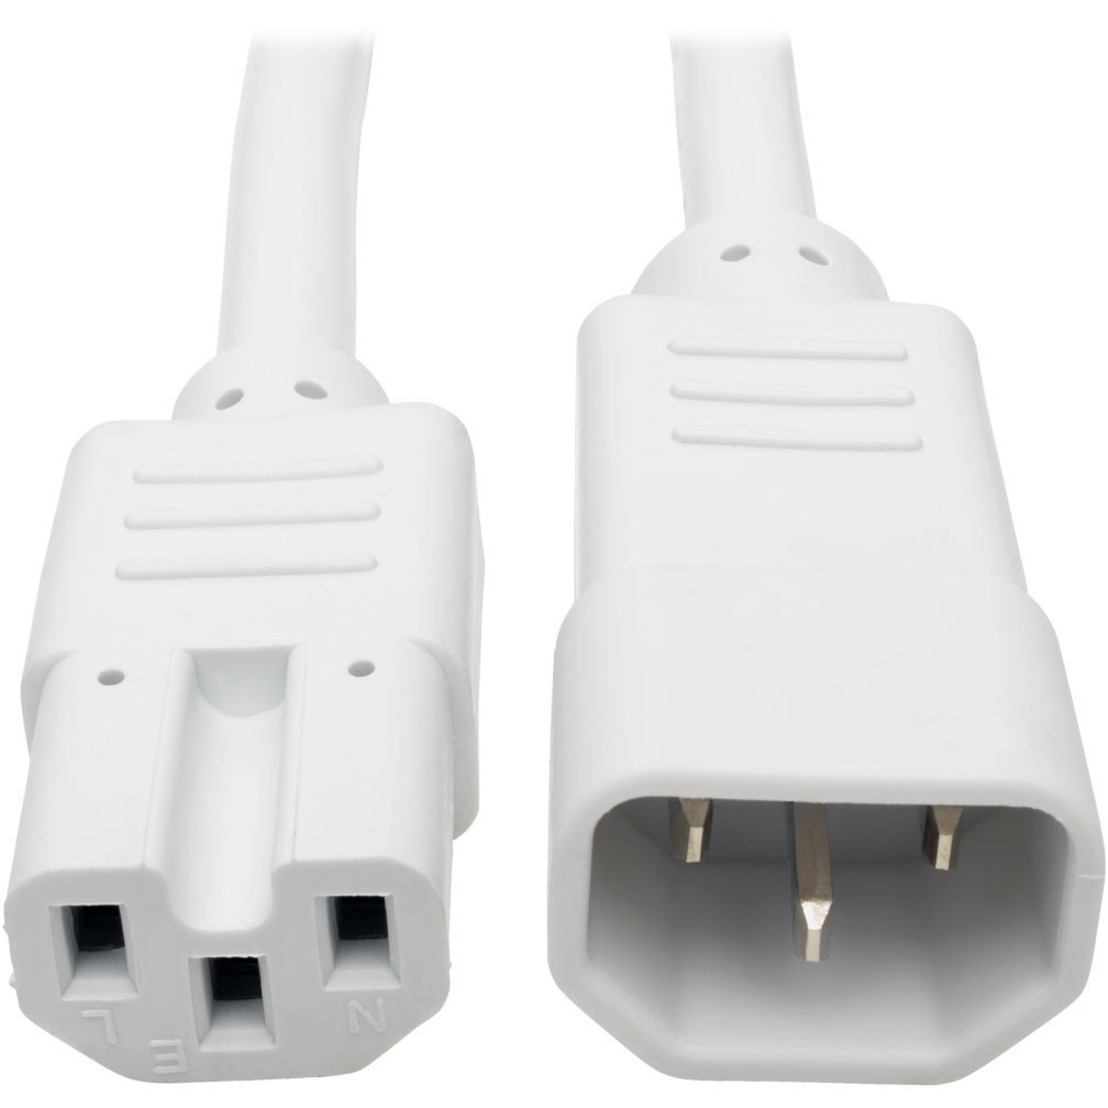 P018-006-AWH 6Ft Heavy Duty Power Cord C14 C15 White - image 1 of 5